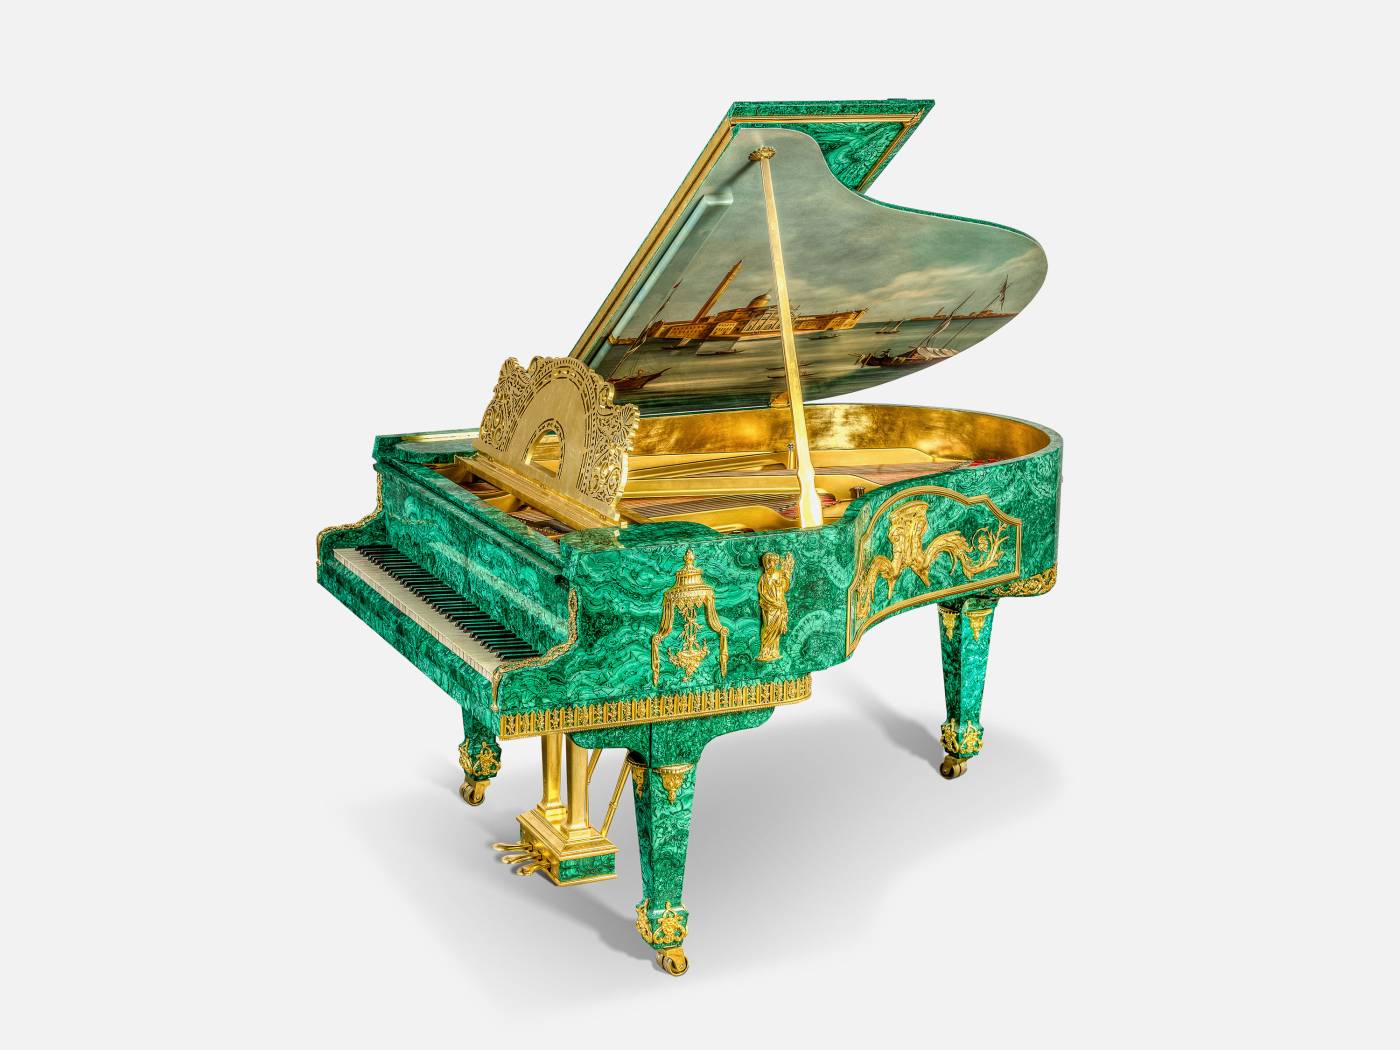 ART. 1096 – Discover the elegance of luxury classic Pianos made in Italy by C.G. Capelletti. Luxury classic furniture that combines style and craftsmanship.